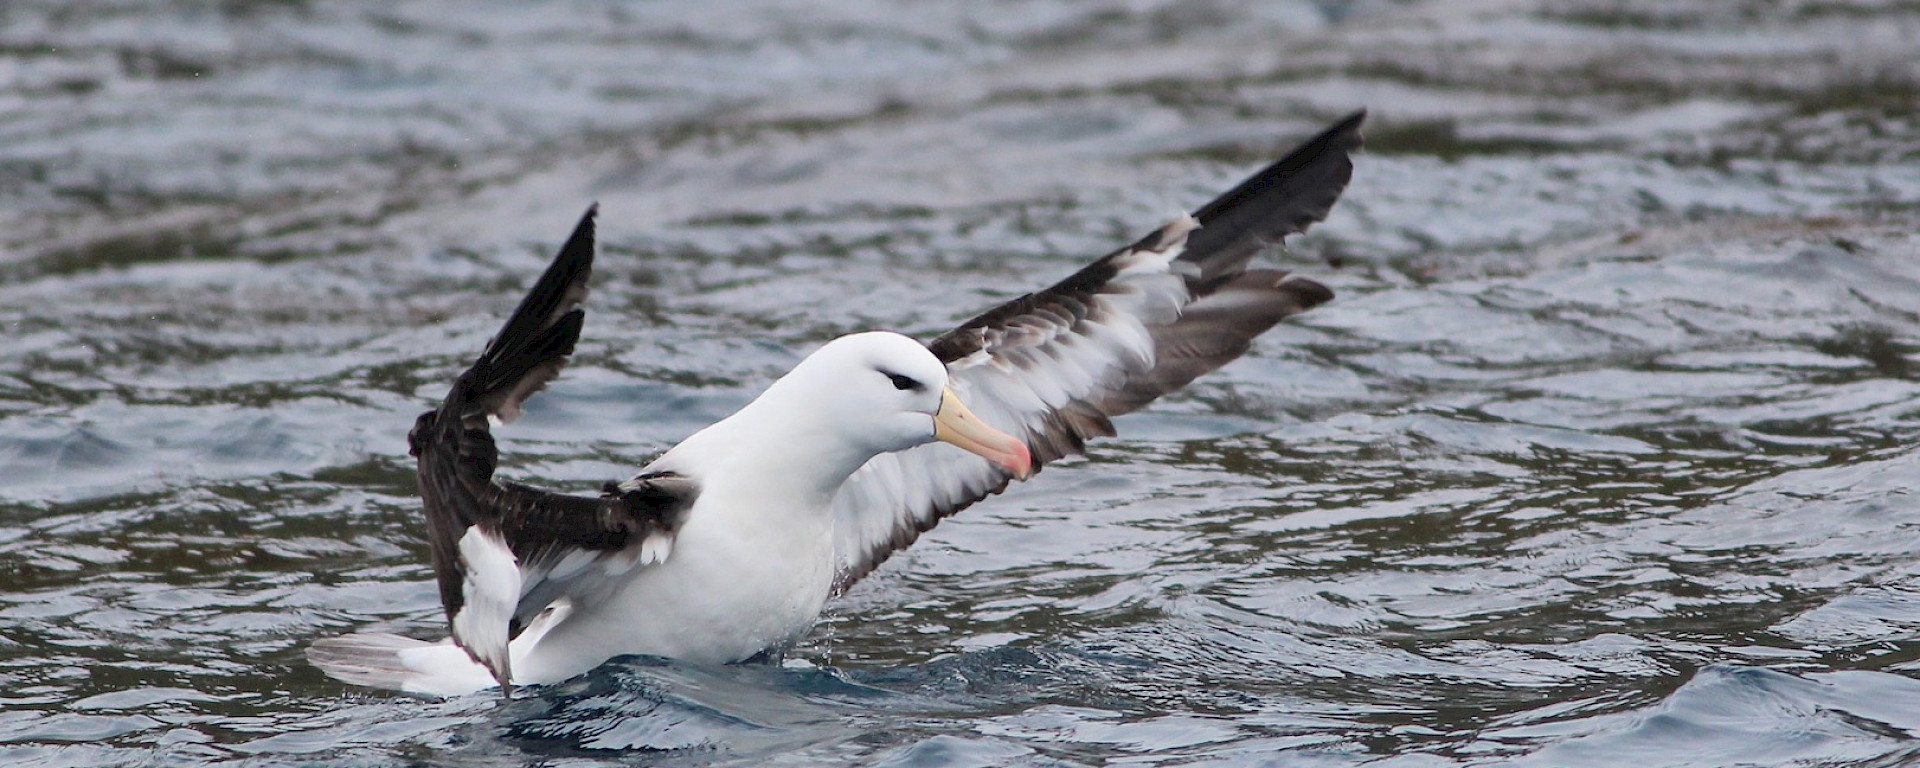 Black-browed albatross alighting from the water. It has it’s wings outstretched